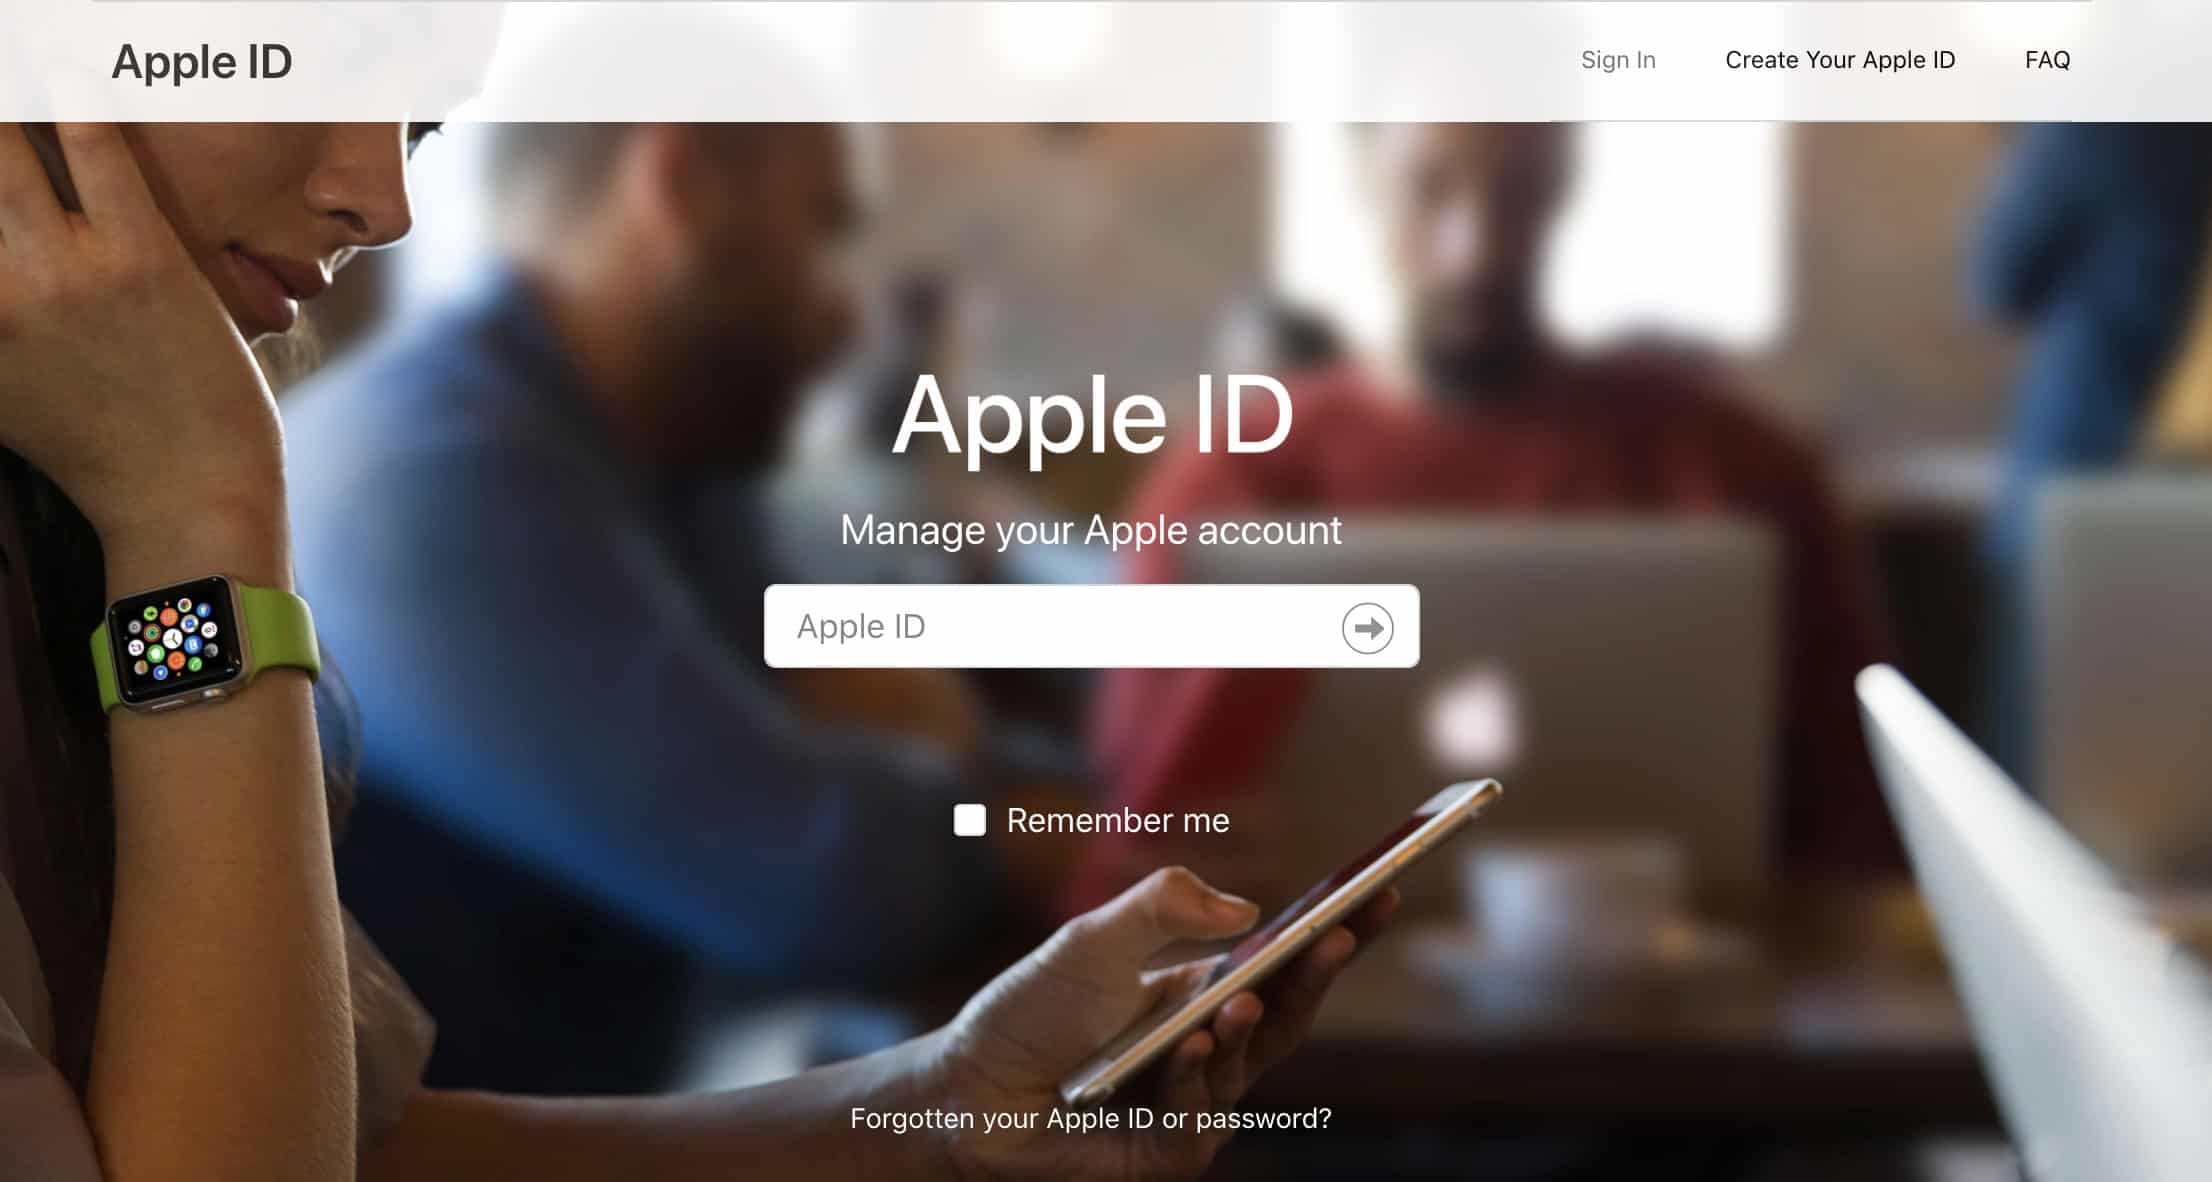 How to remove your Apple ID from an iPhone